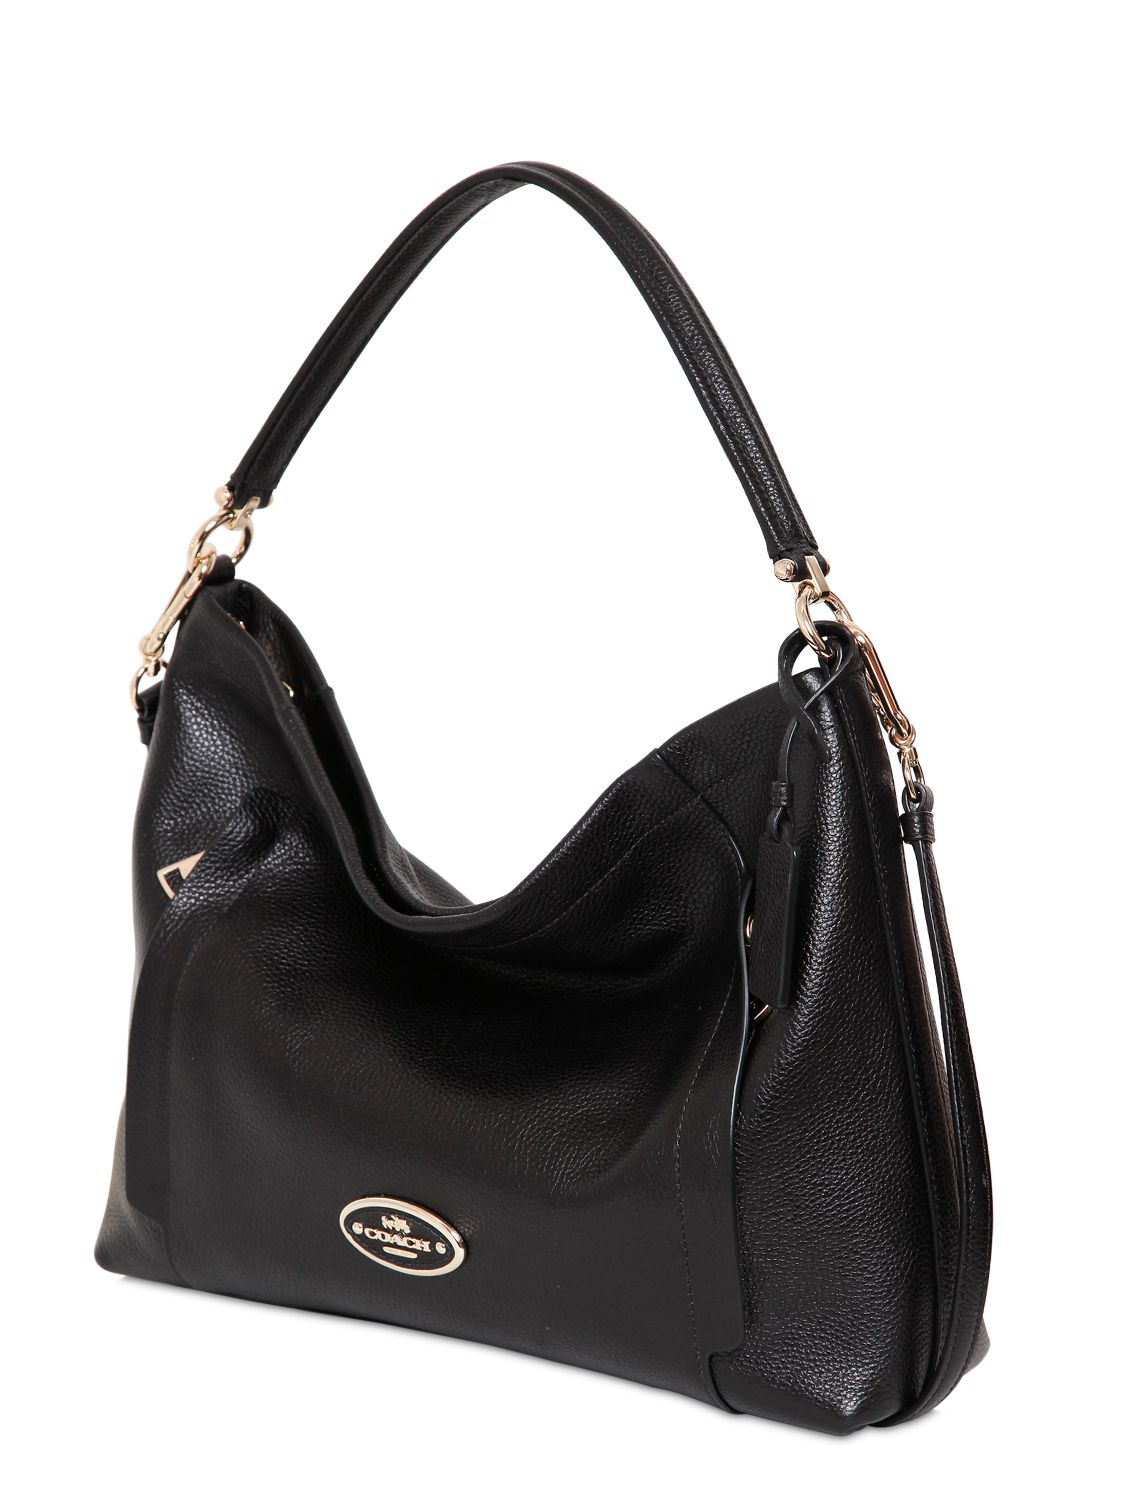 Coach Scout Textured Leather Hobo Bag in Black - Lyst